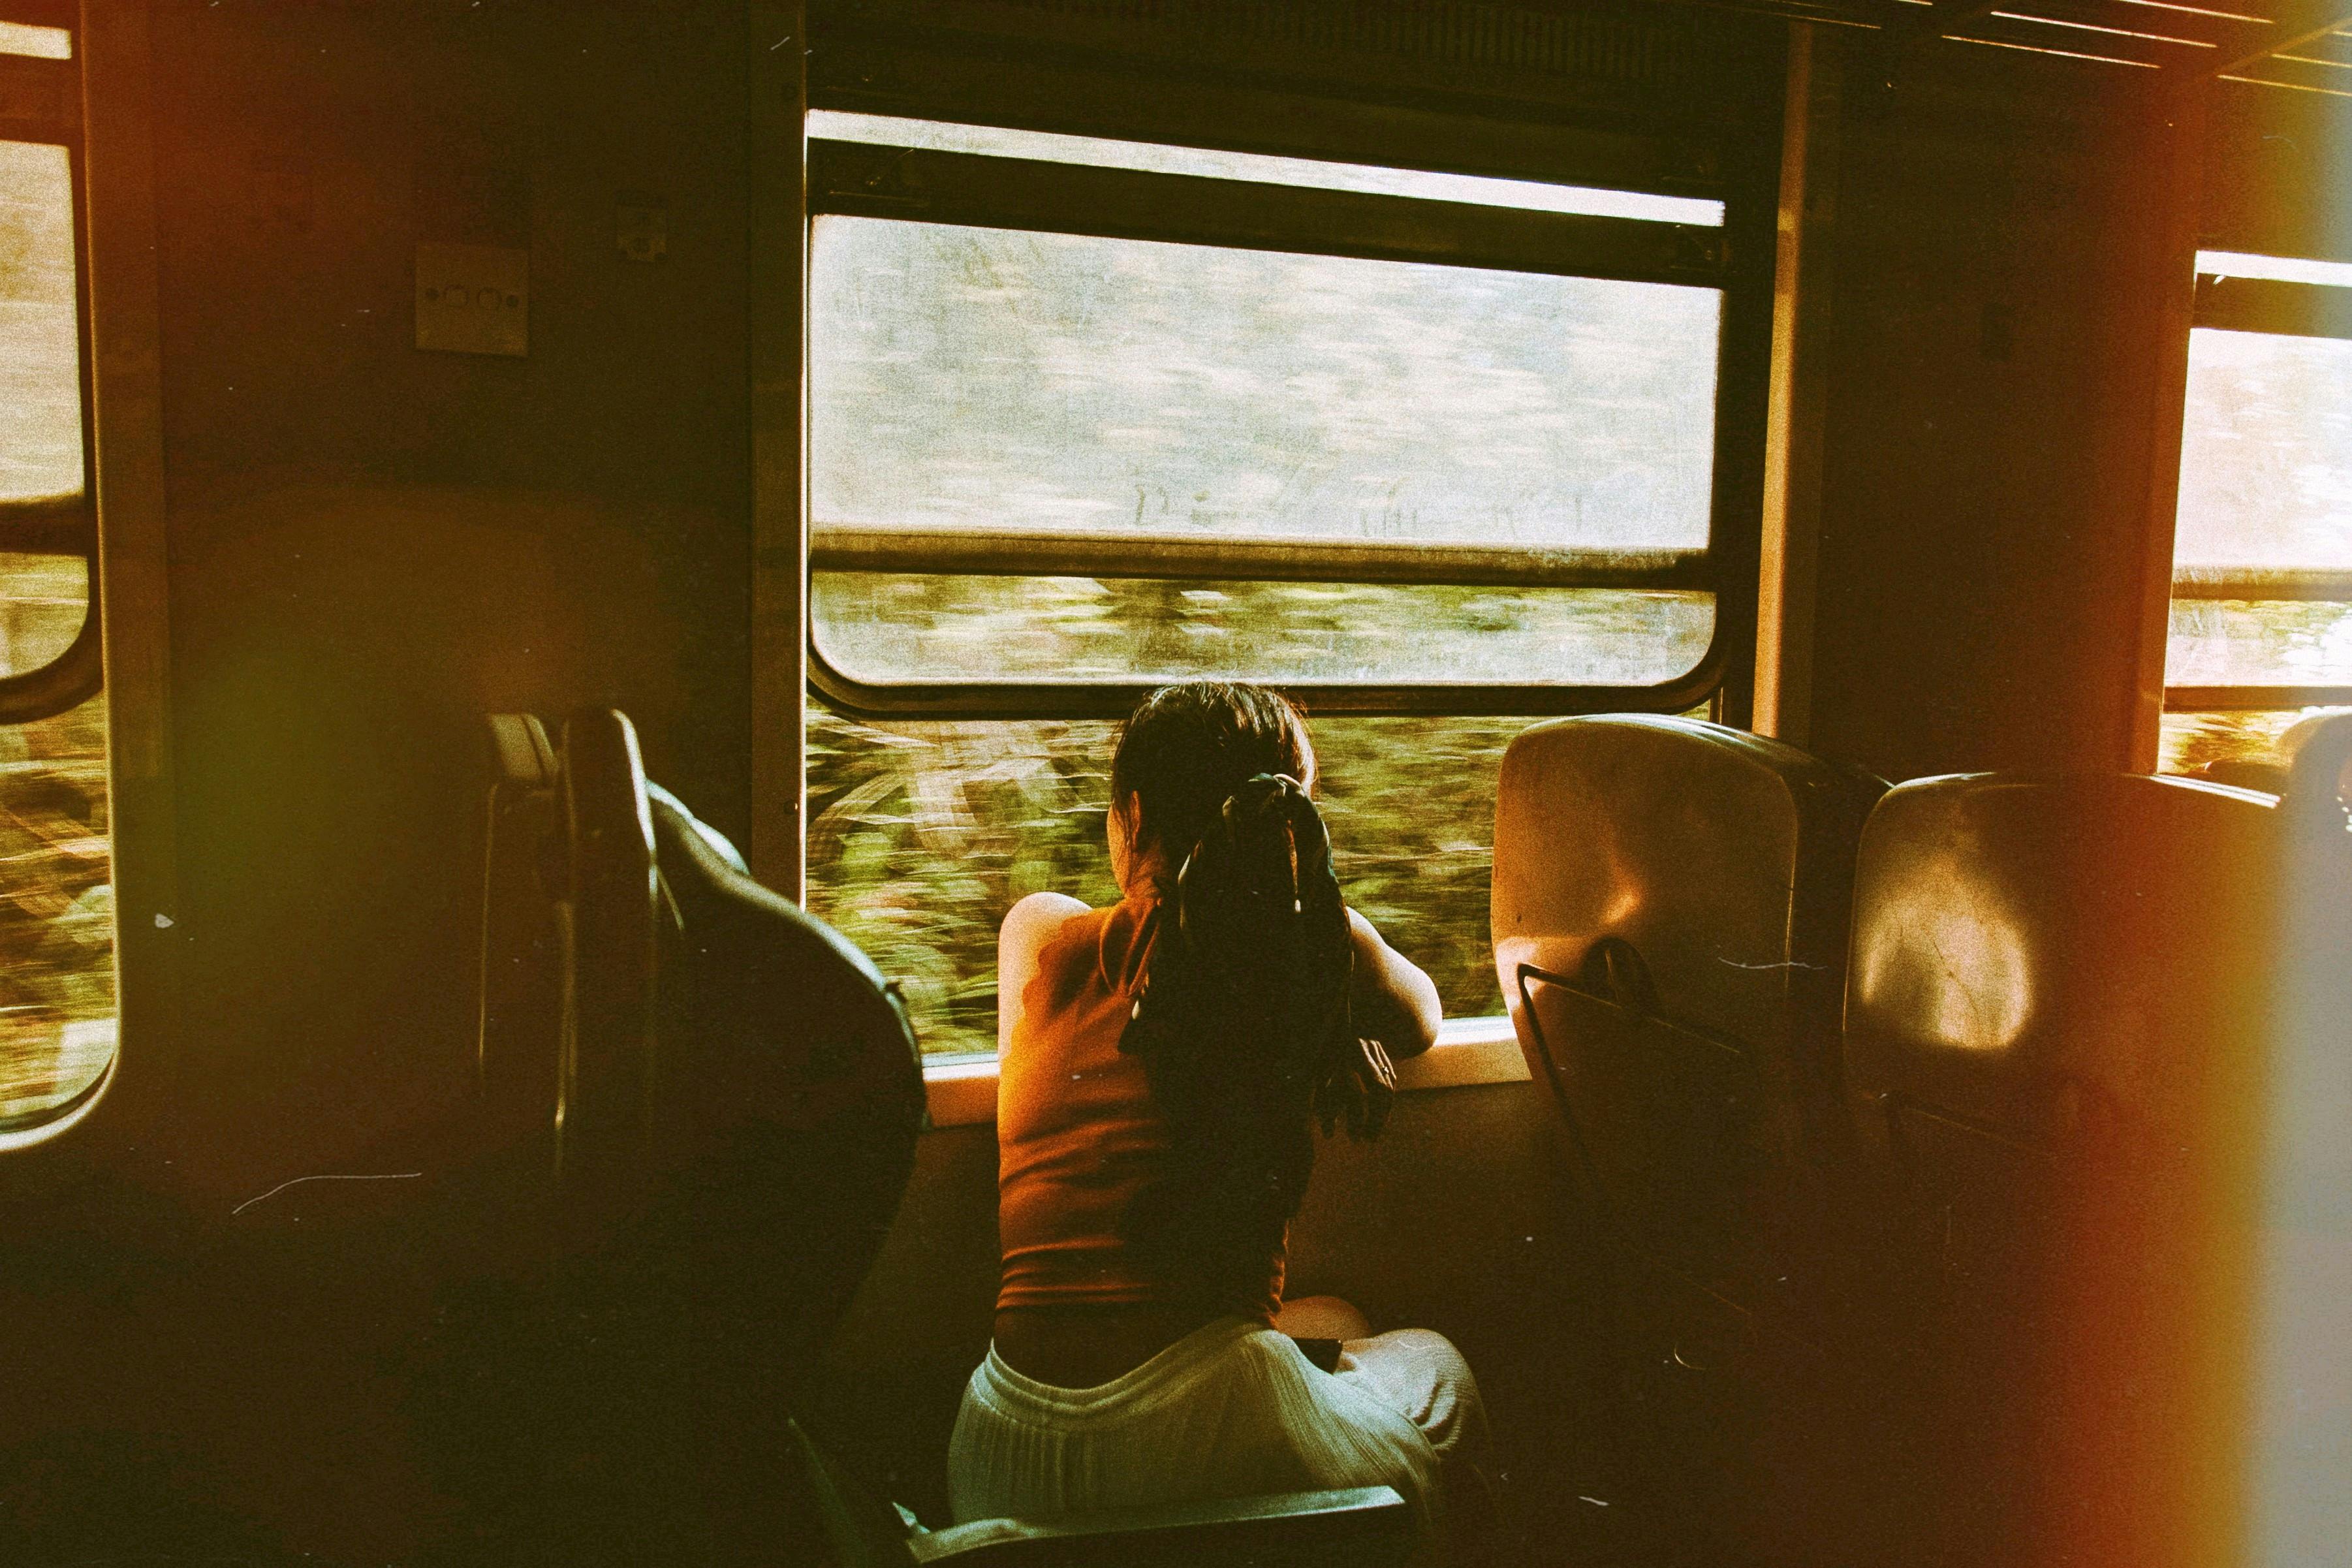 A woman is travelling by train | Source: Pexels